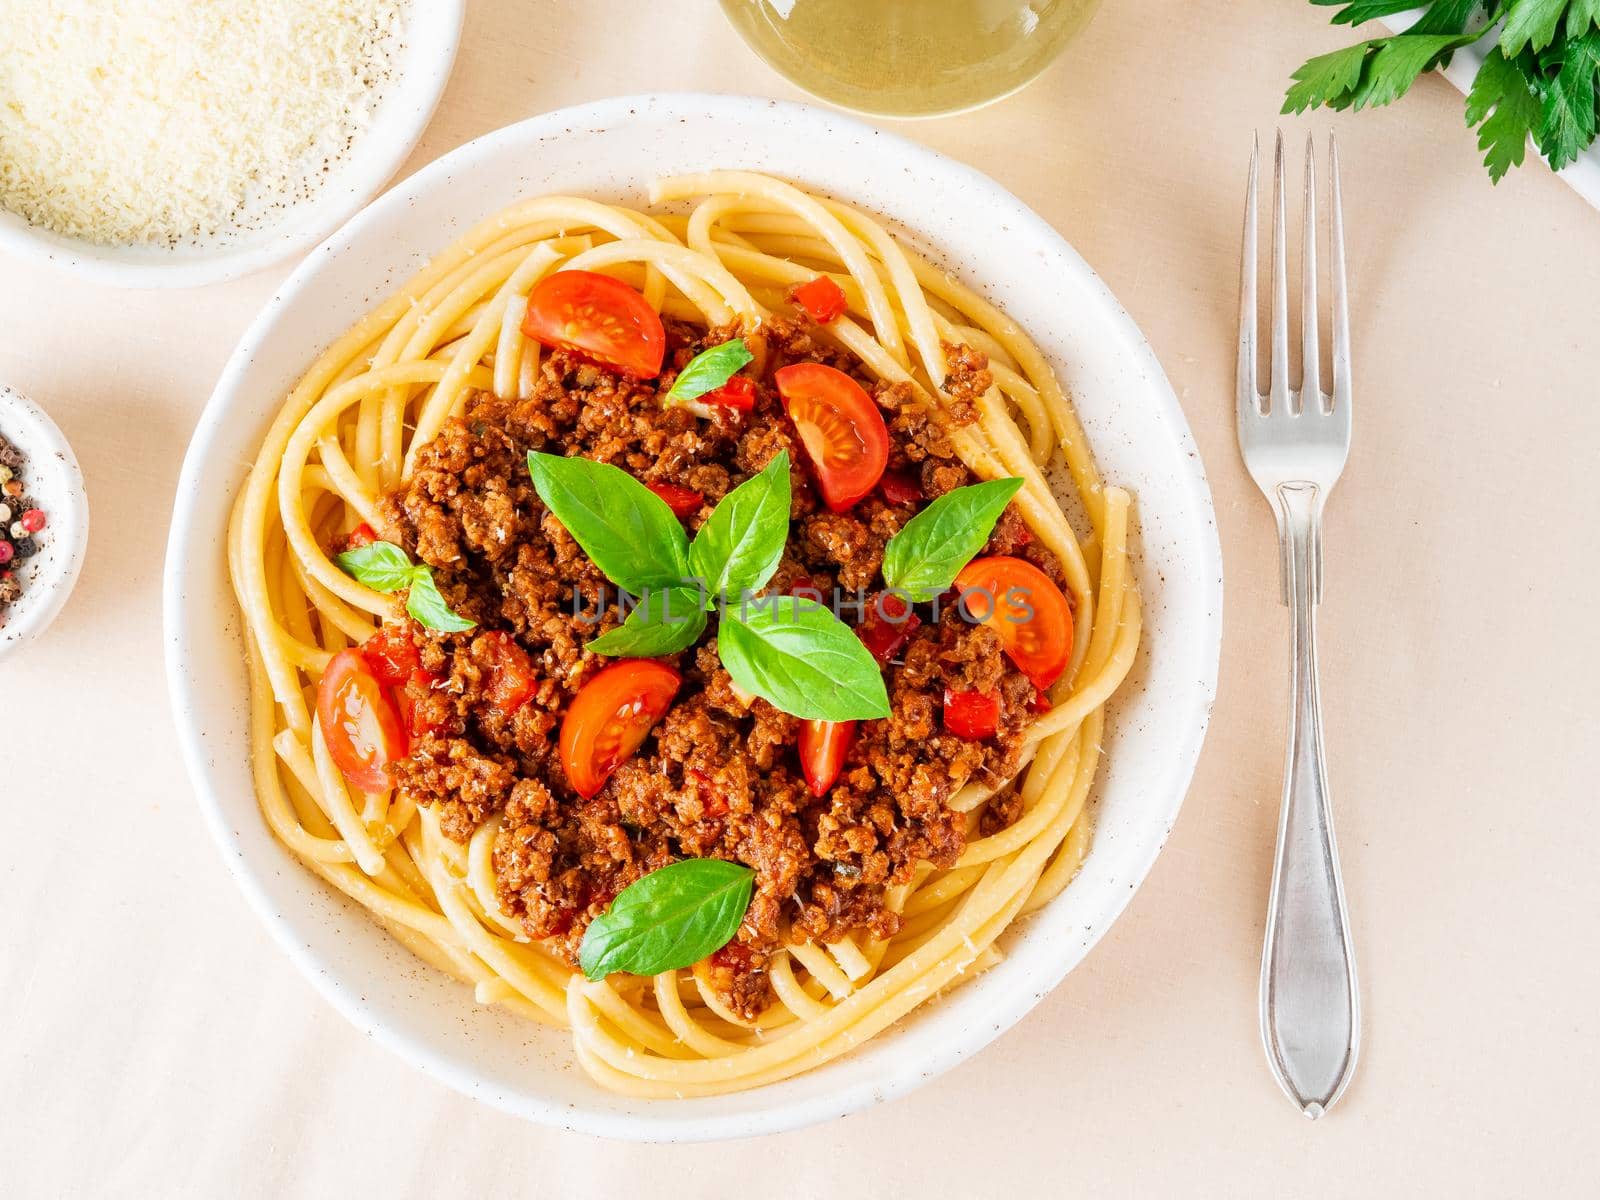 pasta bolognese with tomato sauce, ground minced beef, basil leaves on white table, linen napkin, top view